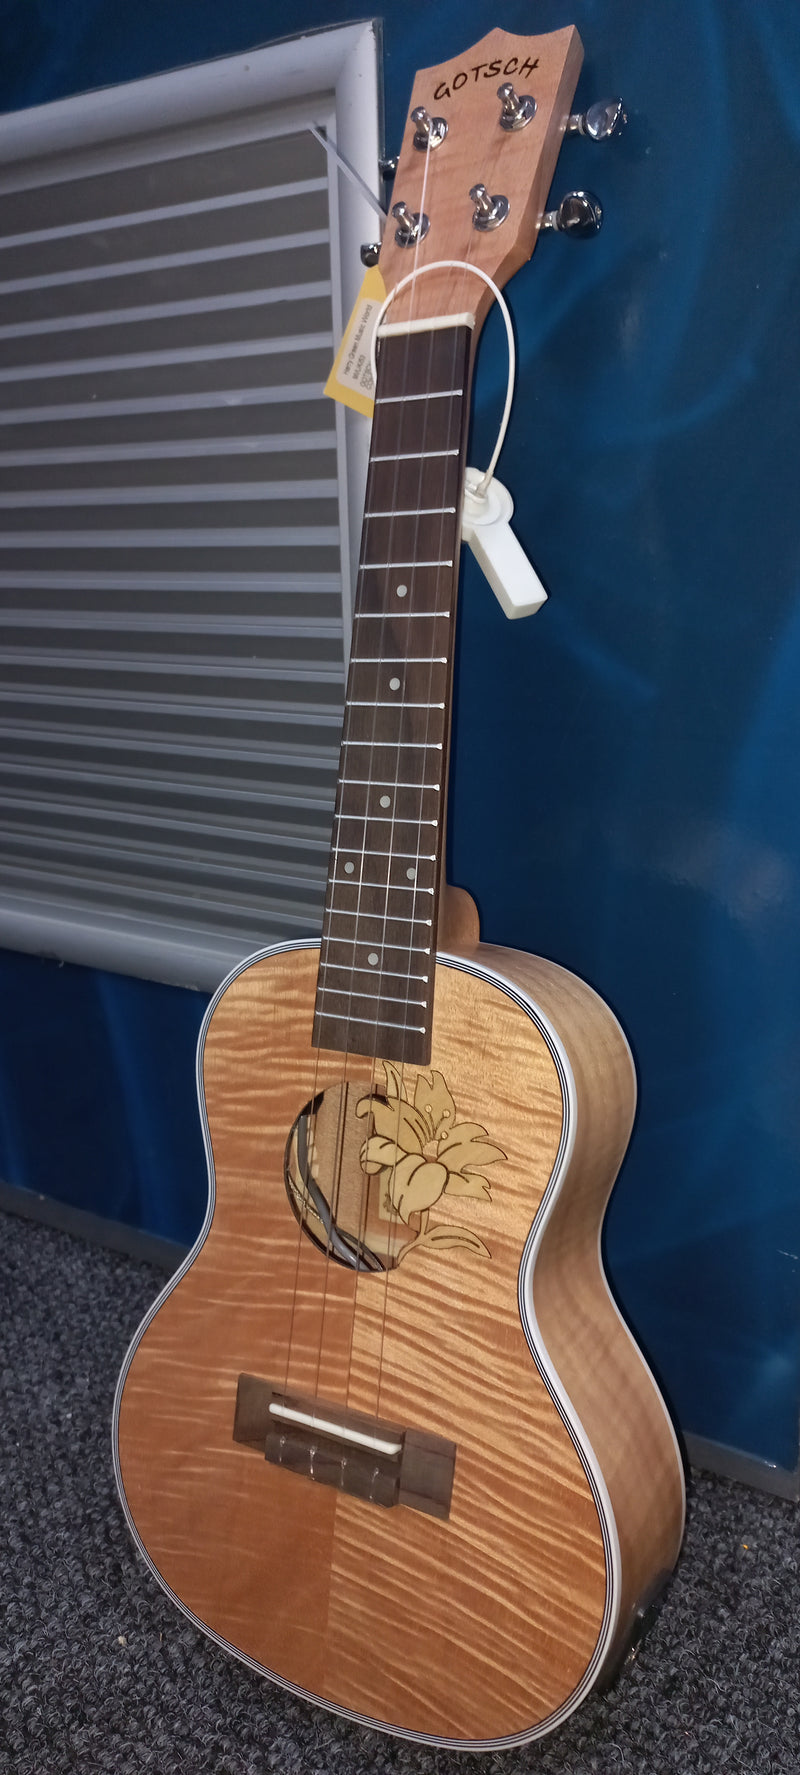 GOTSCH LILY FLOWER CONCERT UKULELE WITH PICK-UP